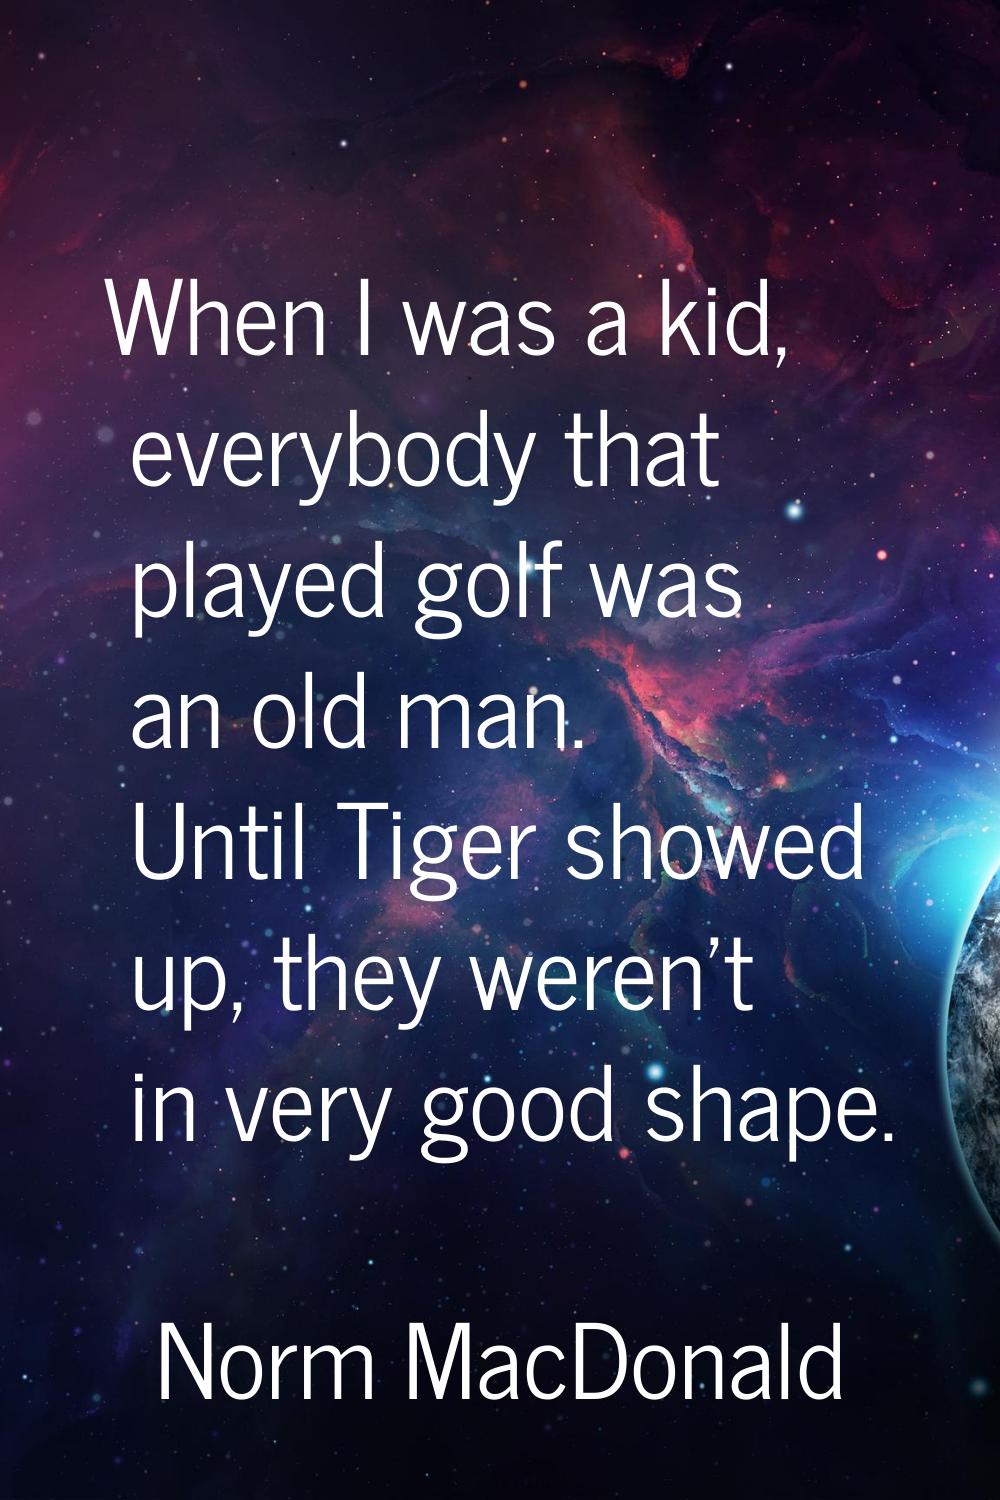 When I was a kid, everybody that played golf was an old man. Until Tiger showed up, they weren't in